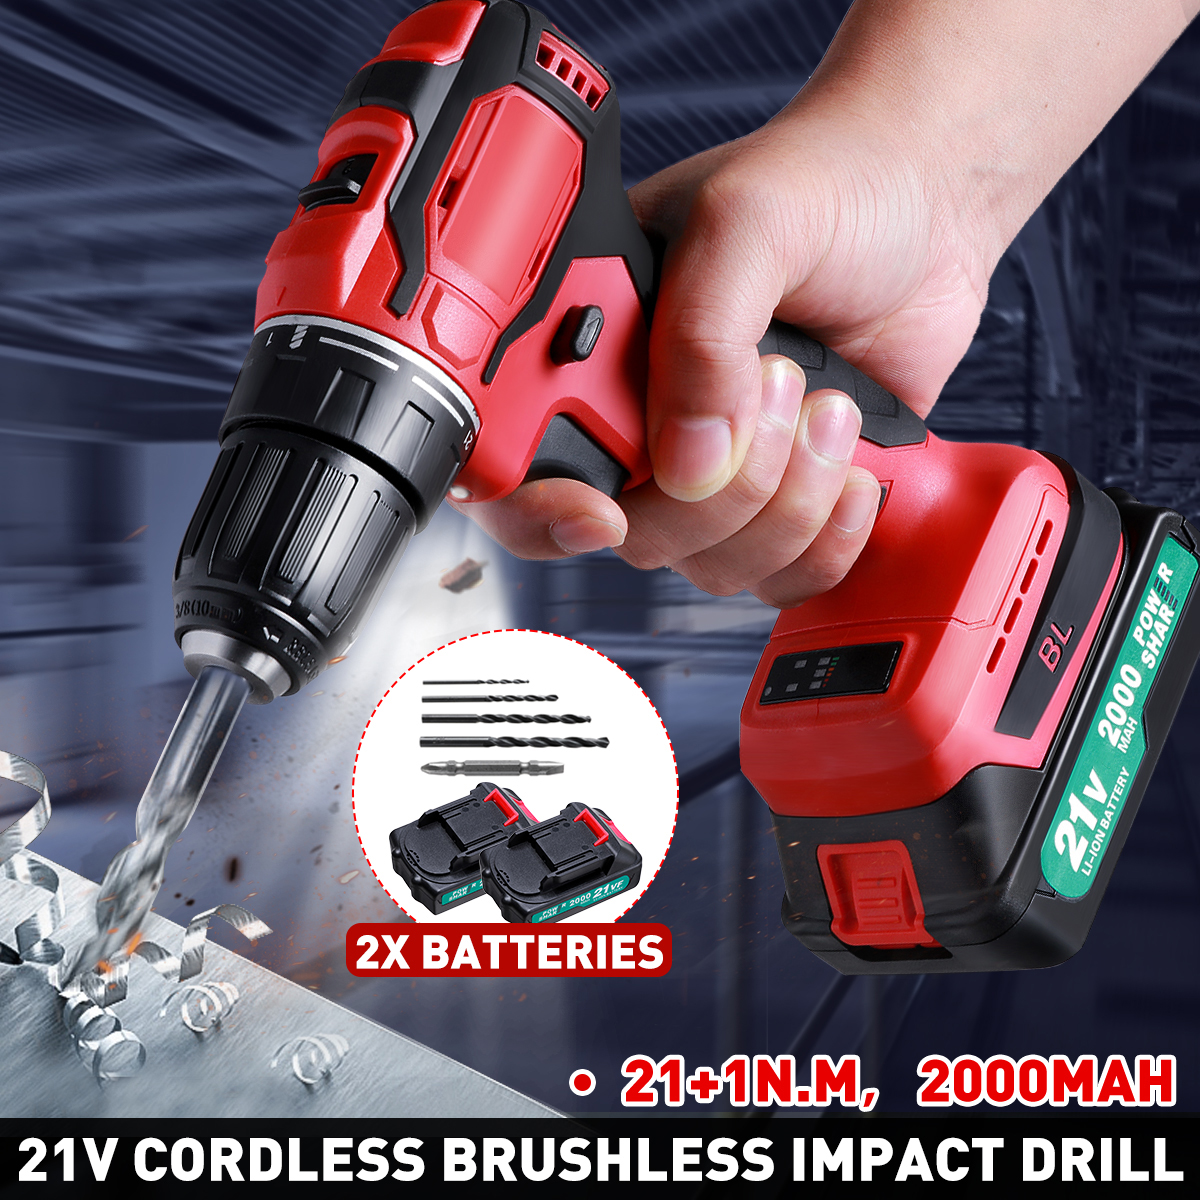 2000mAh-211NM-LED-Cordless-Electric-Drill-2-Speeds-Impact-Drill-W-None1pc2pcs-Battery-1785619-1